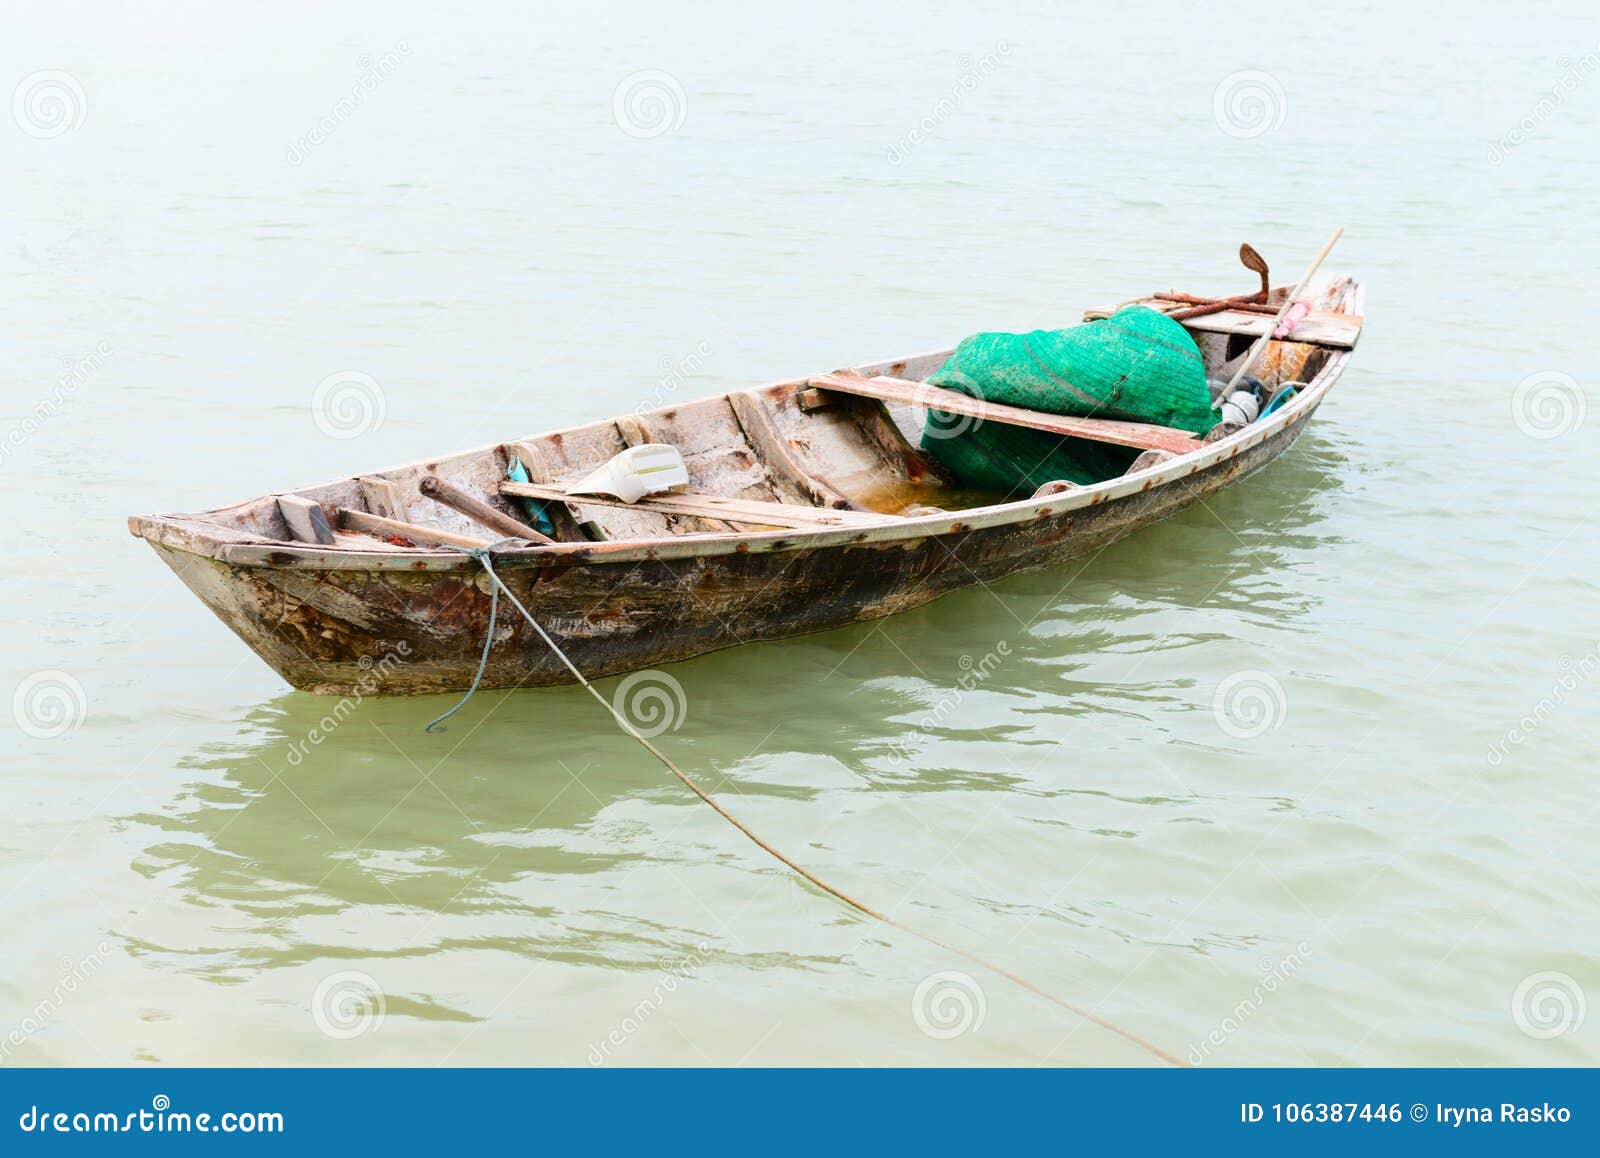 Small wooden fishing boat stock photo. Image of transportation